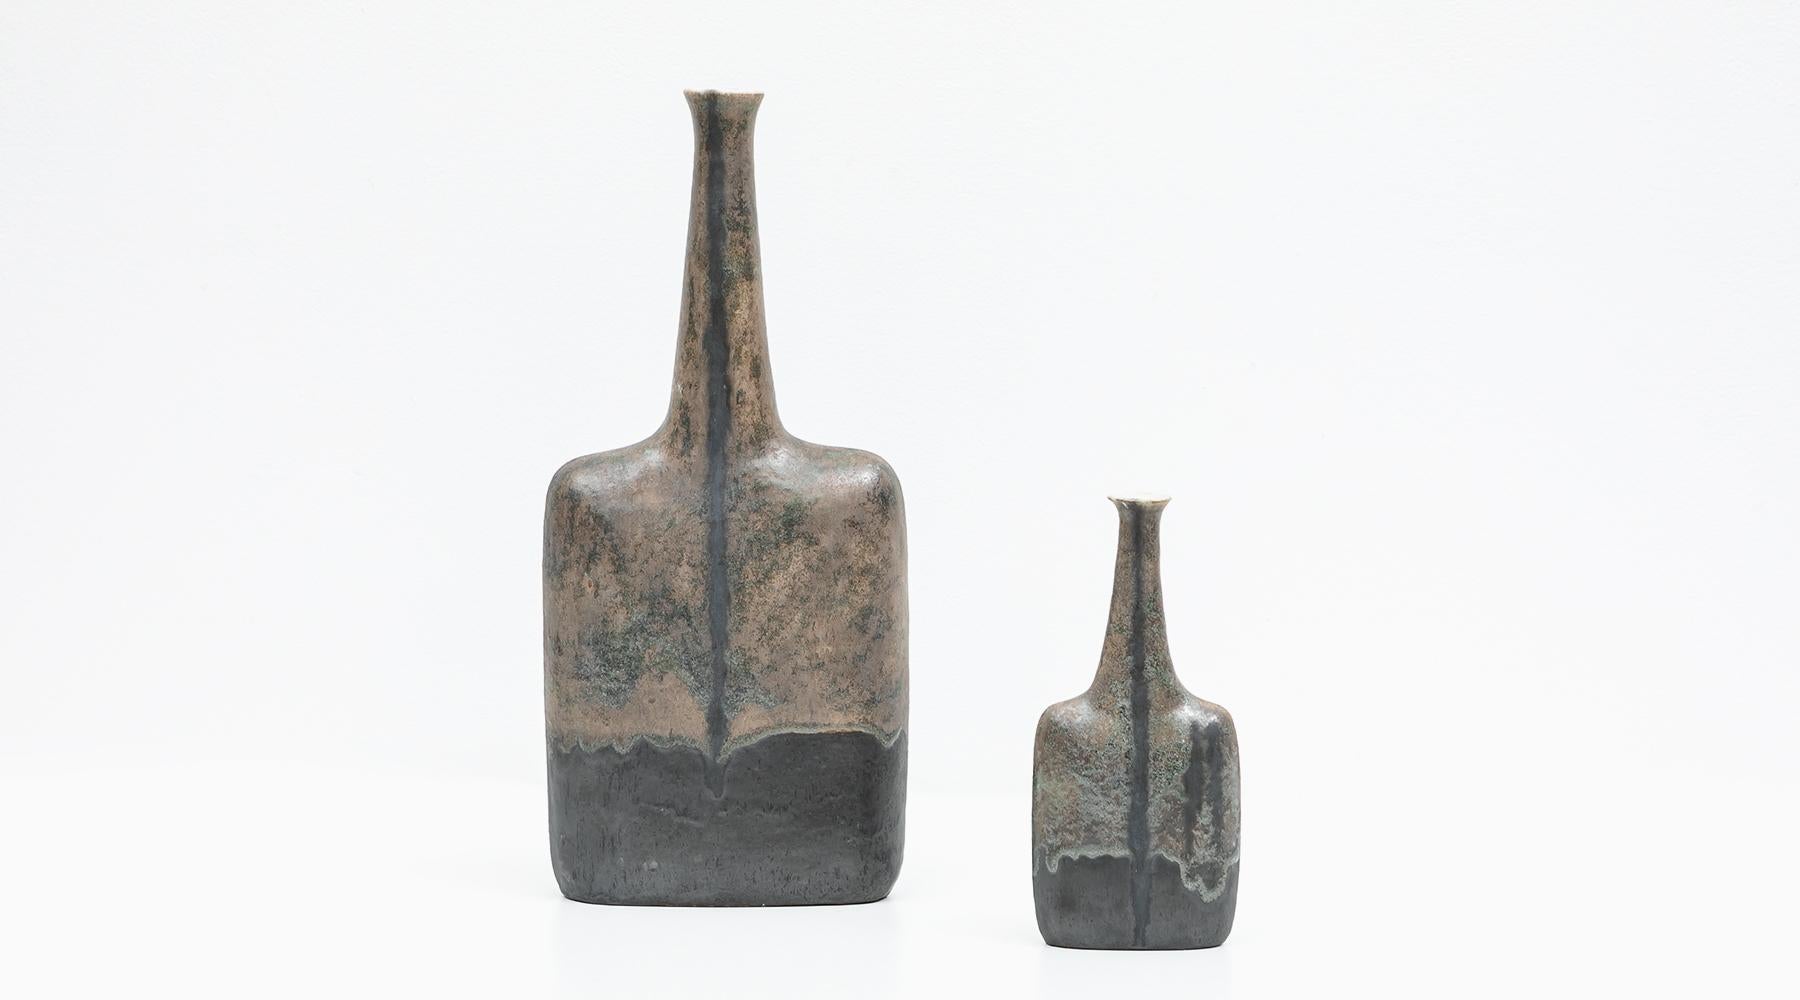 Art pottery in selected earth color, set of two vases, ceramic, Bruno Gambone, Italy, 1980s.

Two exceptionally beautiful sculptural objects by the well-known Italian artist Bruno Gambone. A master of his craft can be seen again in this example.